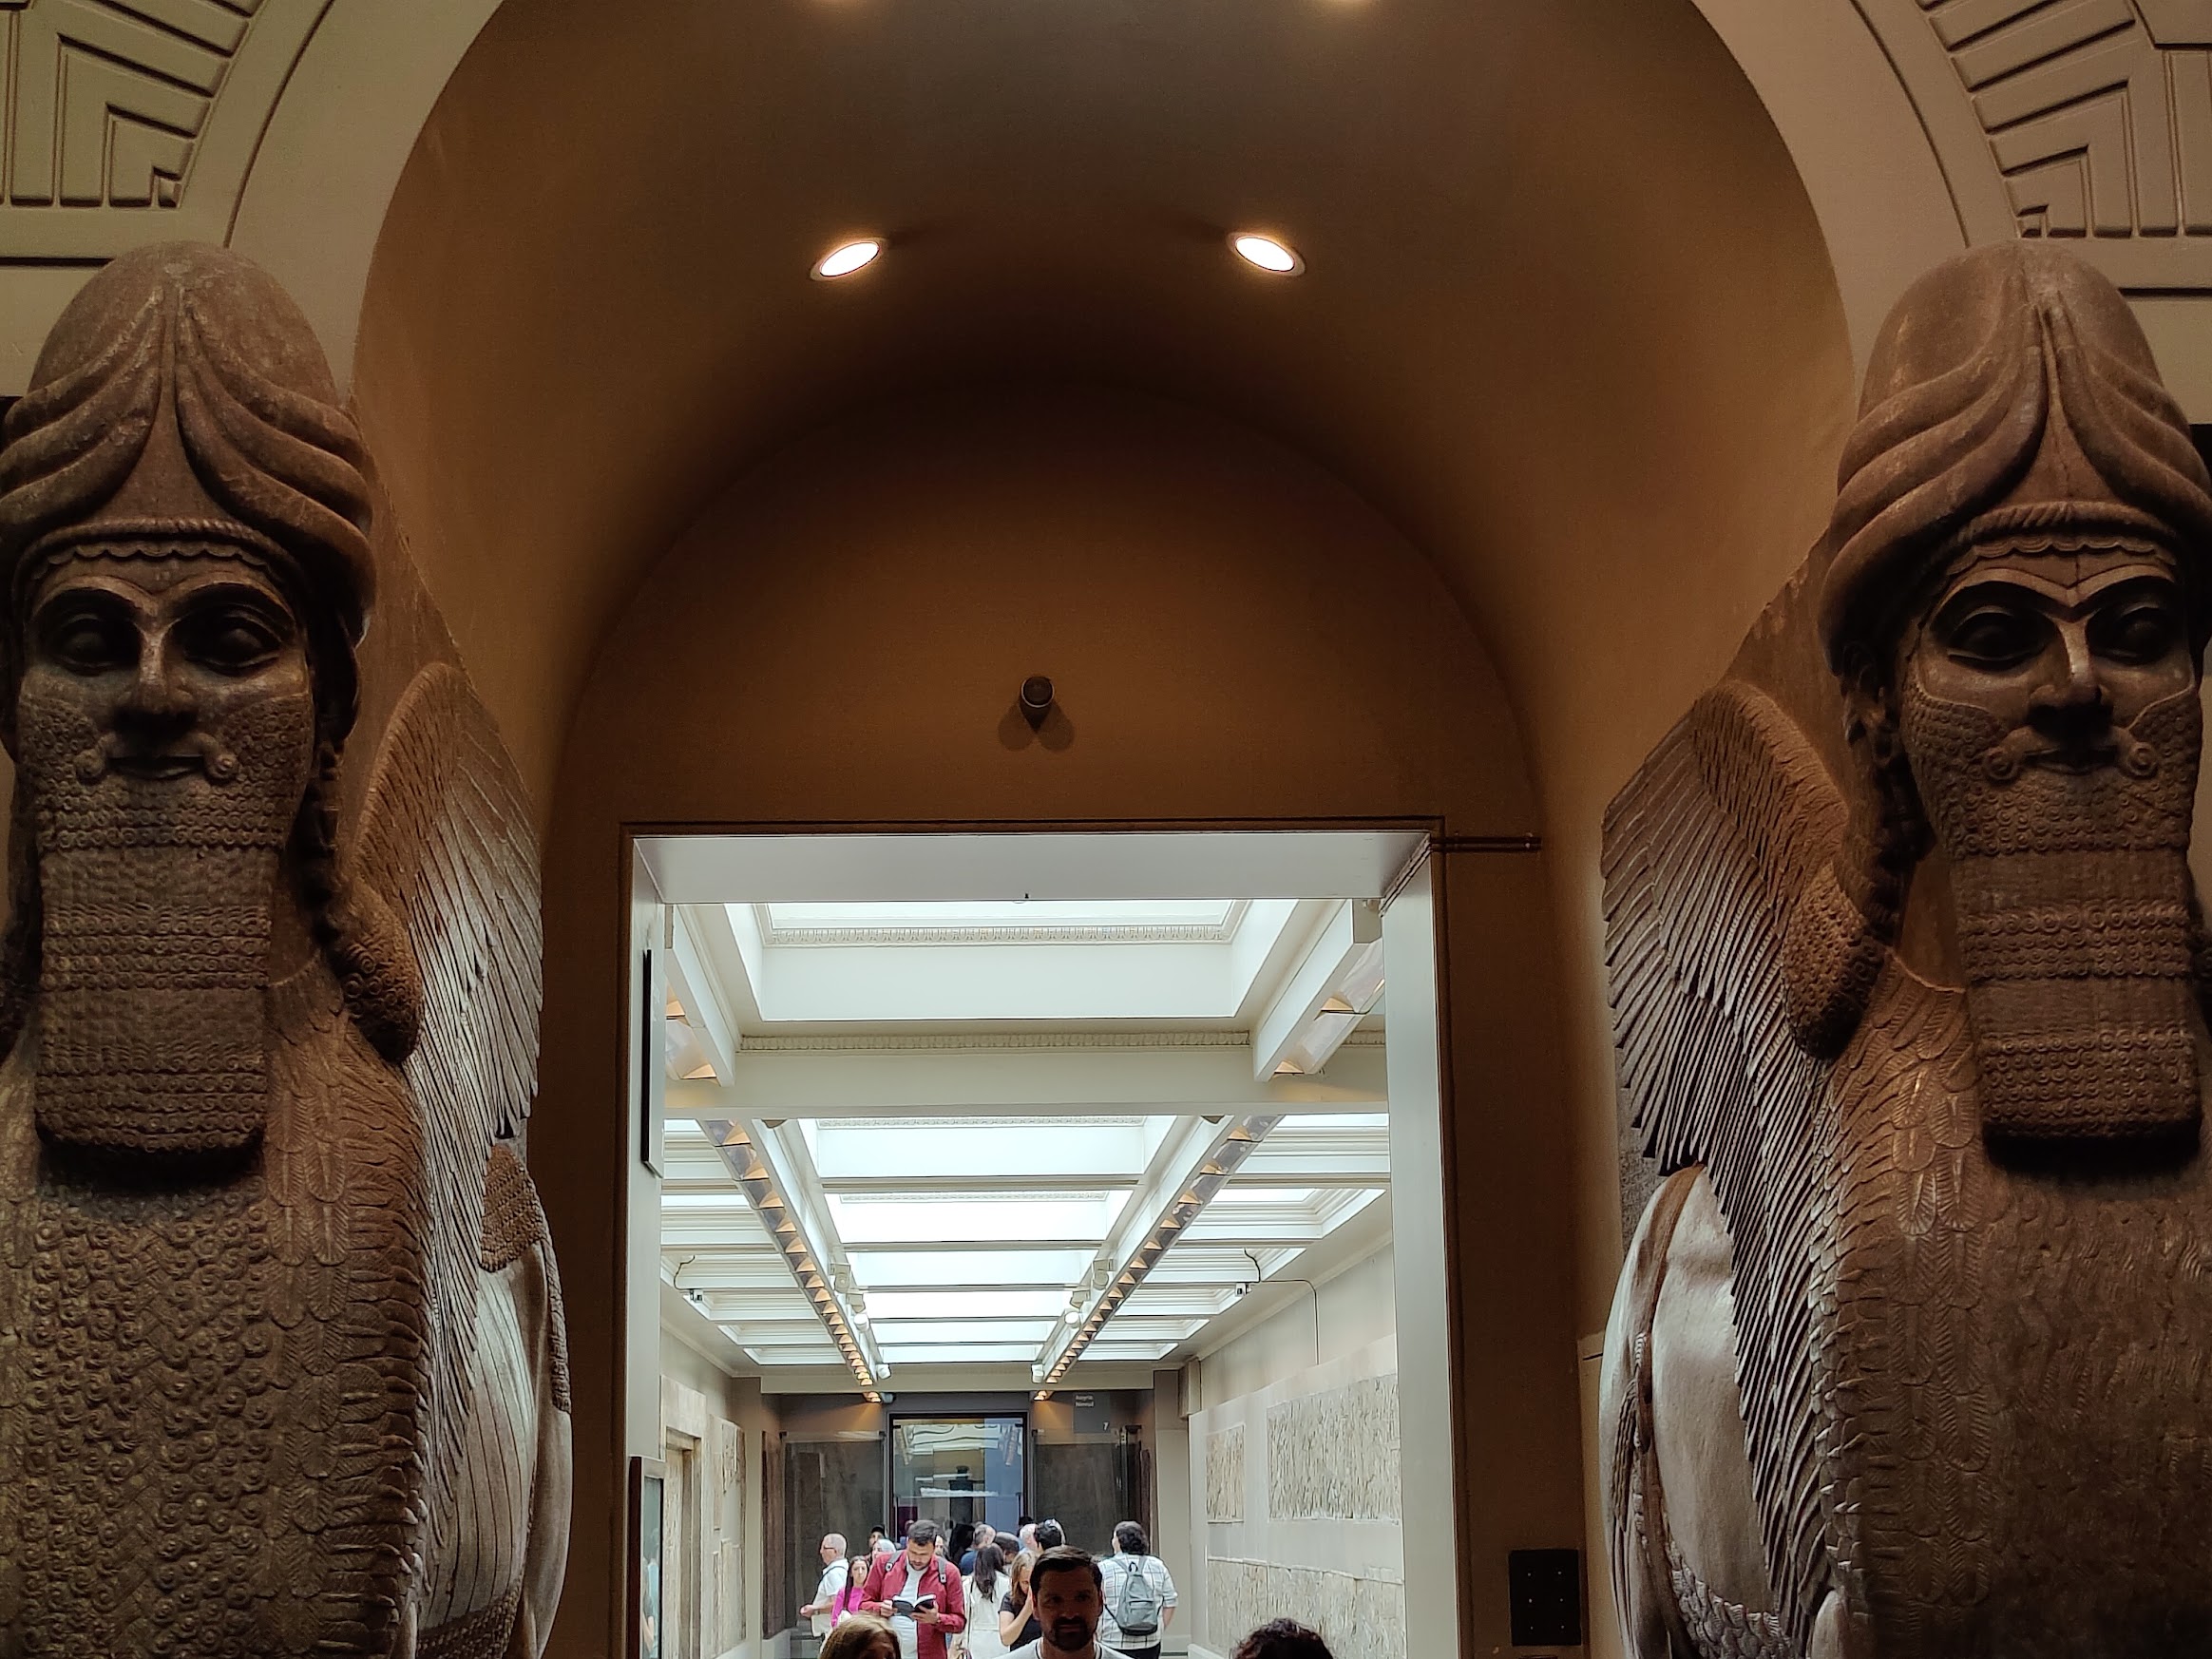 Assyrian gate statues in front of a door